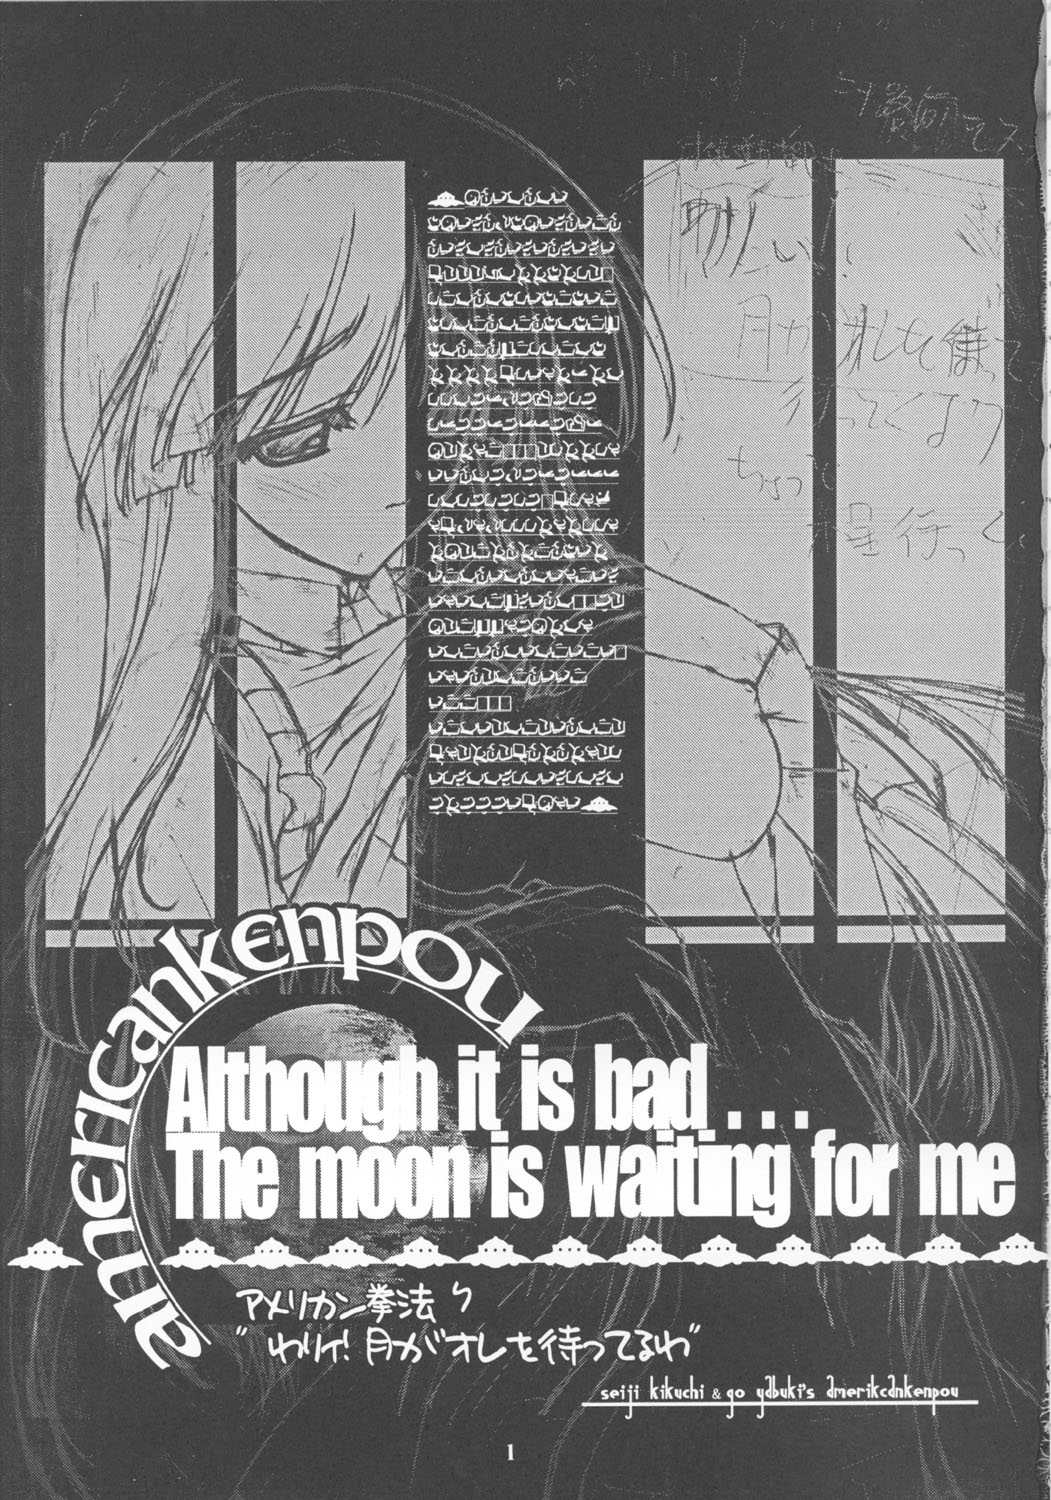 [American Kenpou] Although it is bad...The moon is waiting for me [アメリカン拳法] わりぃ！月が俺を待ってるわ